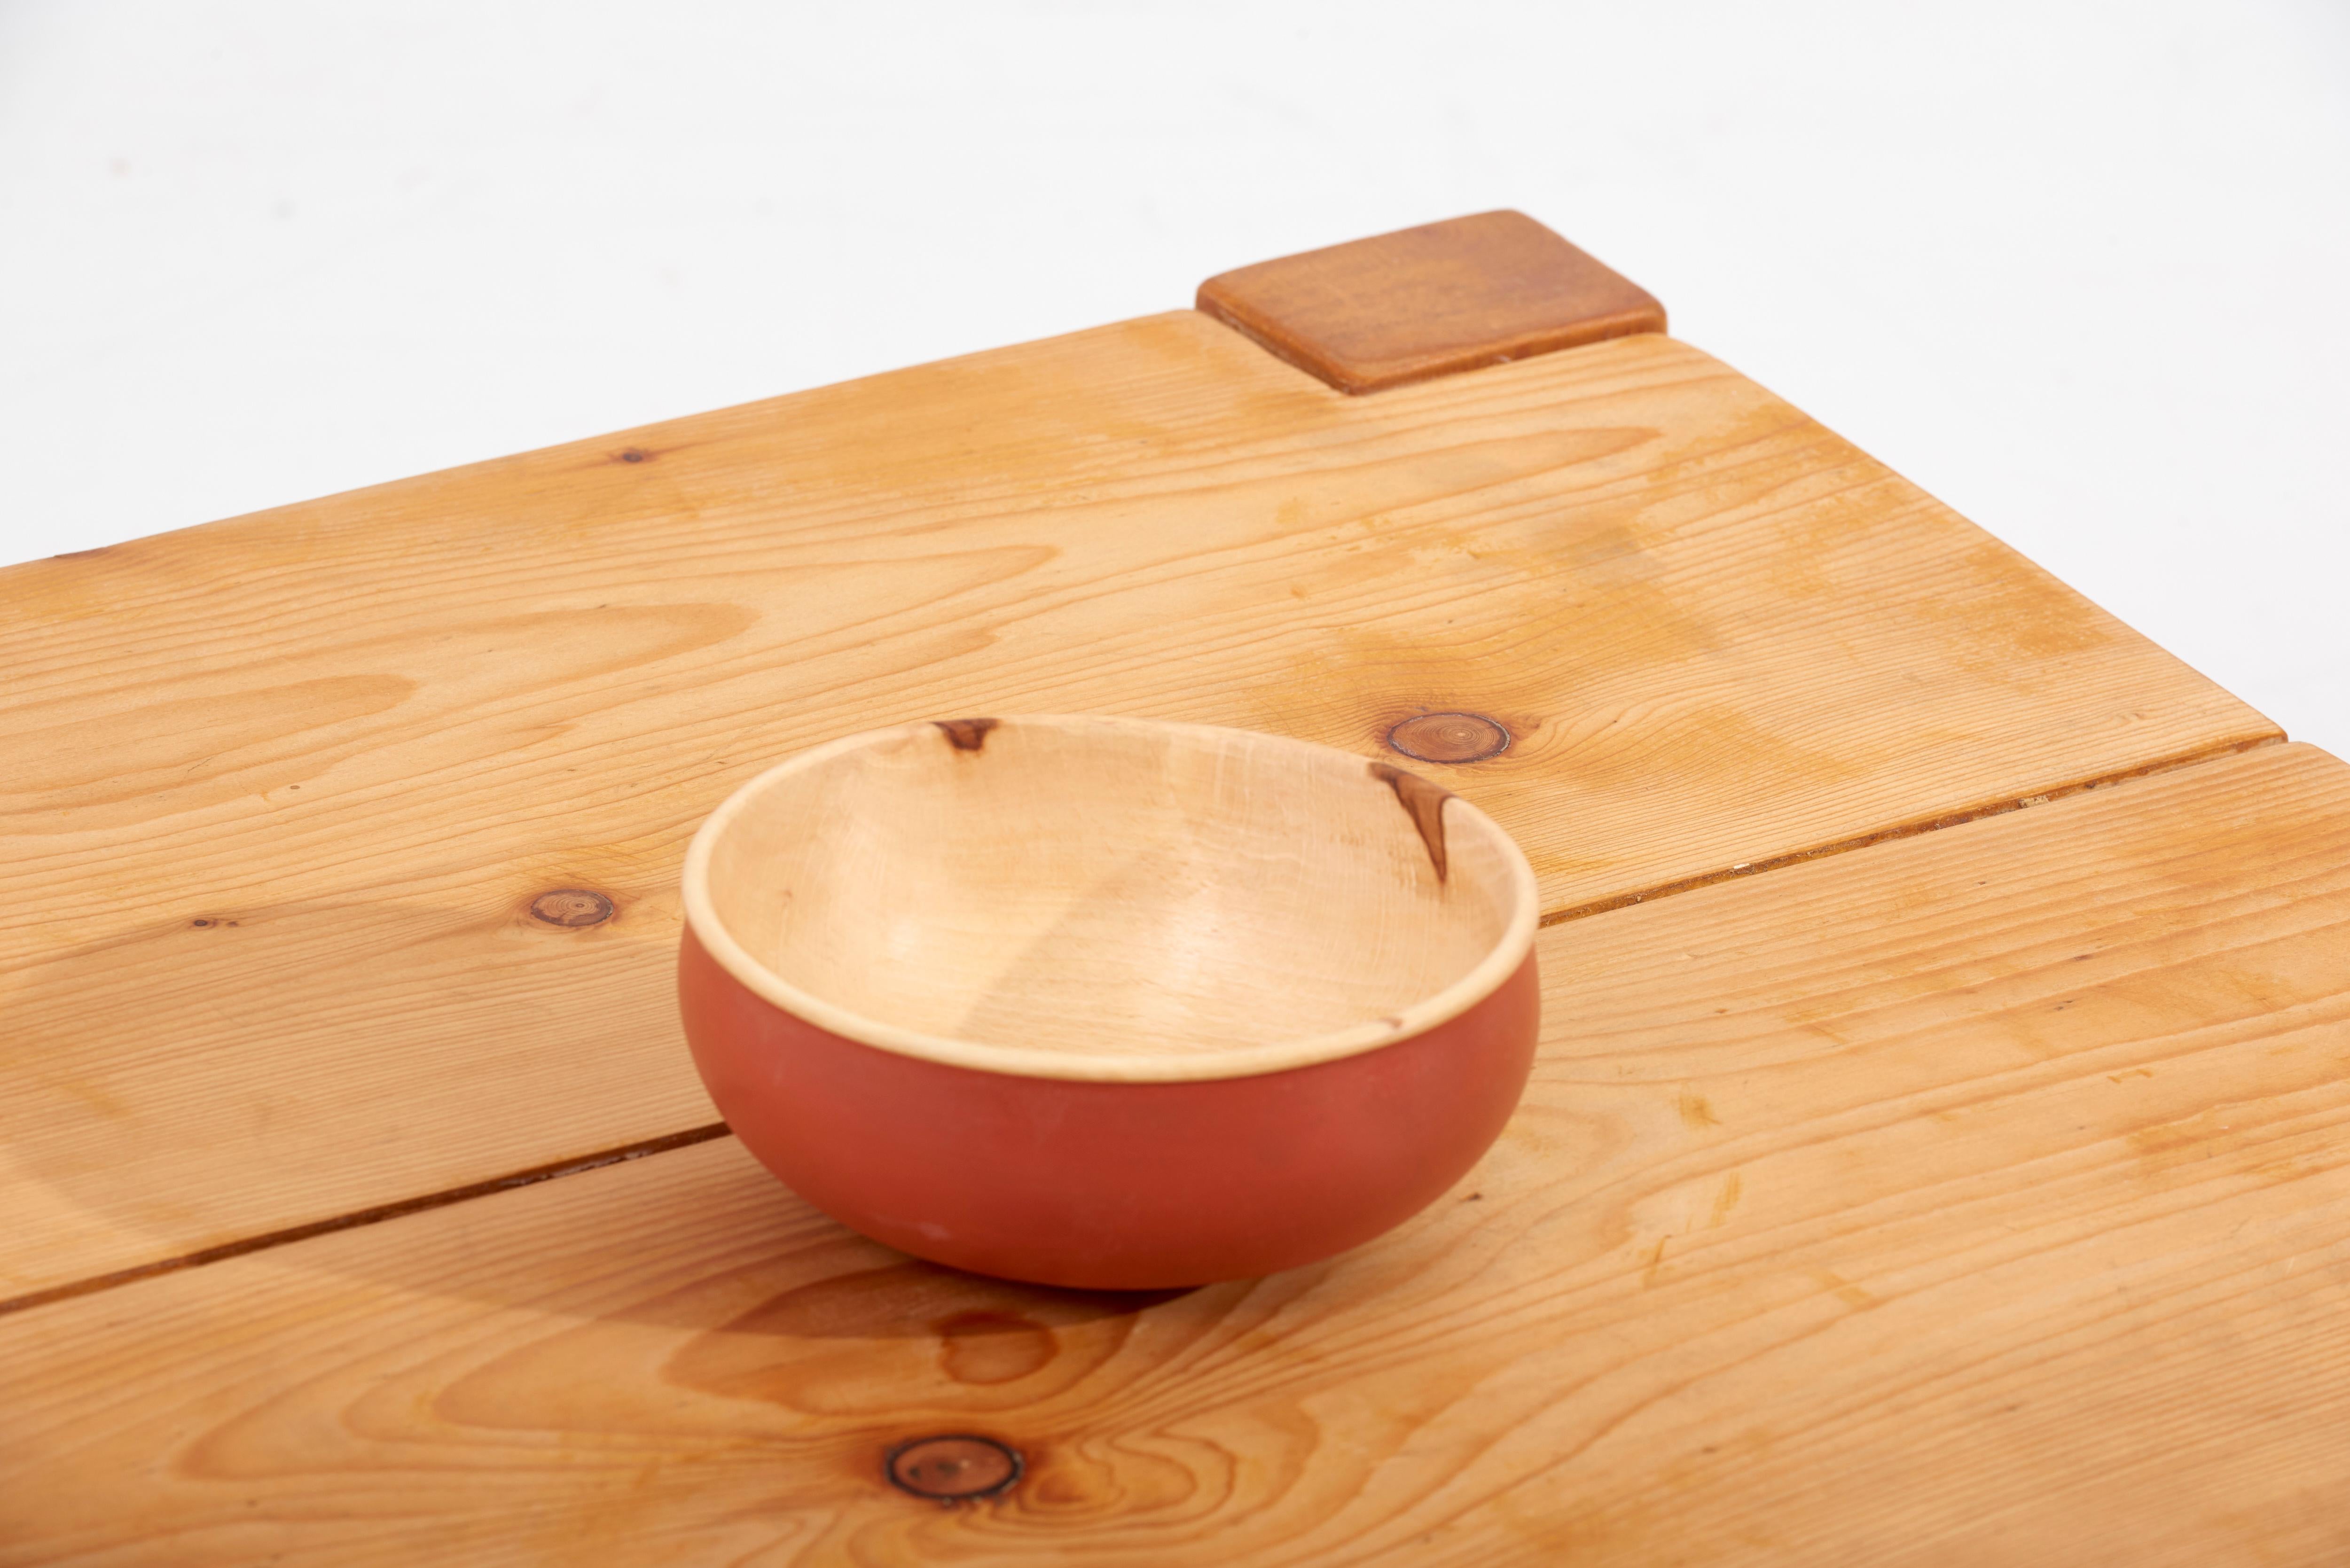 Contemporary Set of 4 Wooden Bowls by Fabian Fischer, Germany, 2020